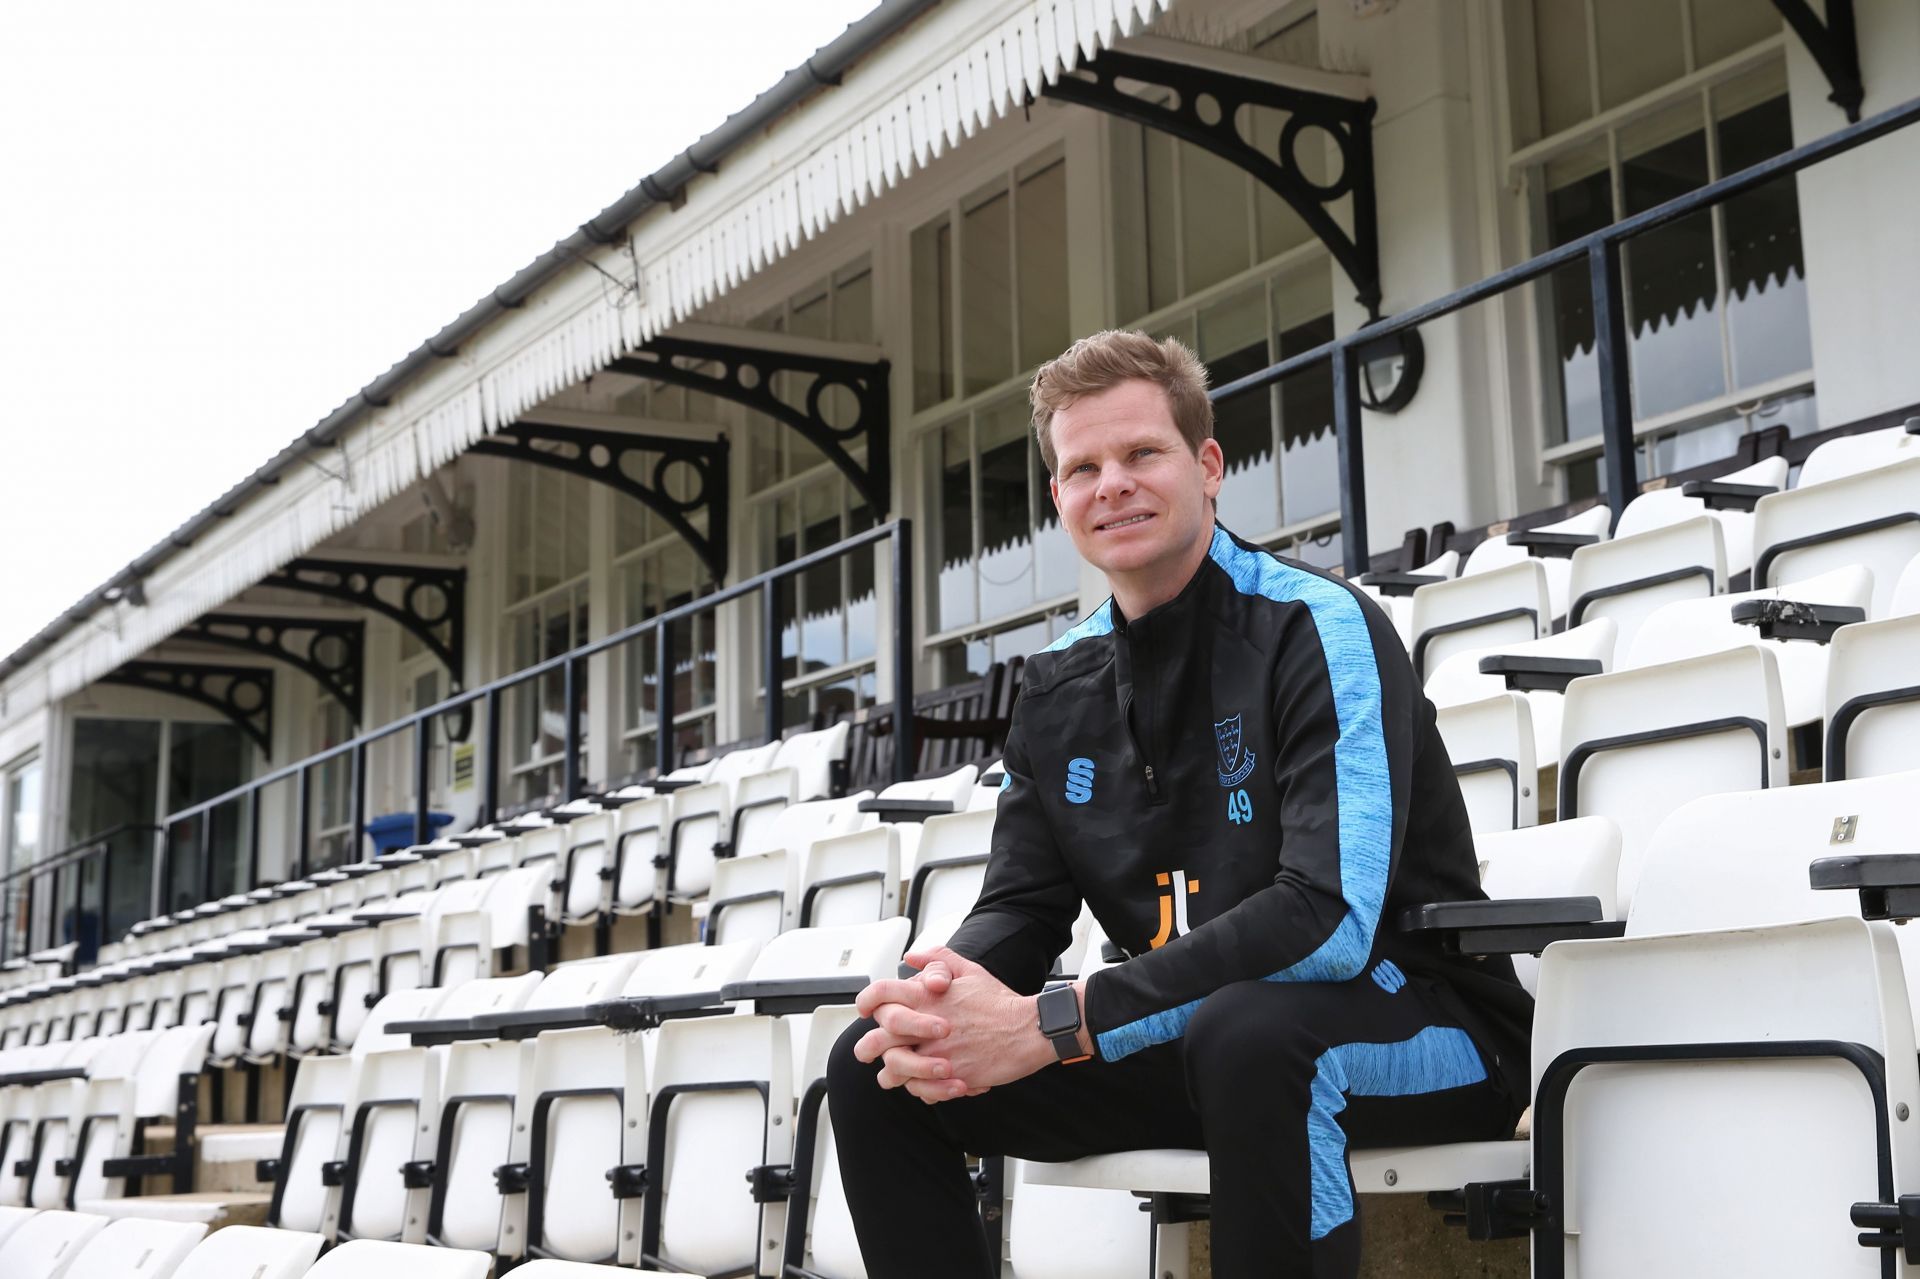 Steve Smith Joins Sussex CCC